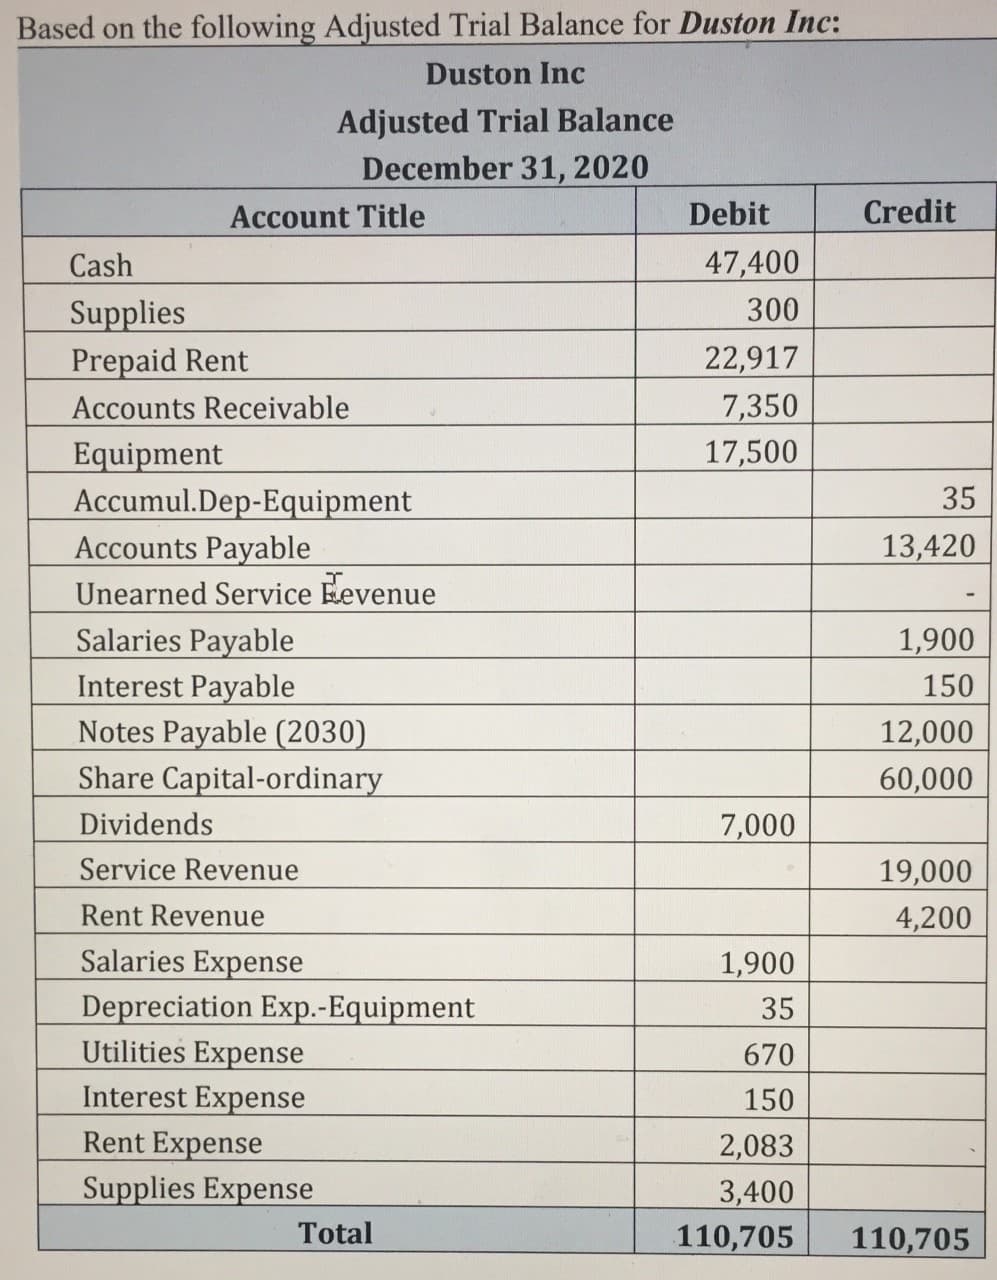 Based on the following Adjusted Trial Balance for Duston Inc:
Duston Inc
Adjusted Trial Balance
December 31, 2020
Account Title
Debit
Credit
Cash
47,400
Supplies
300
22,917
7,350
17,500
Prepaid Rent
Accounts Receivable
Equipment
Accumul.Dep-Equipment
Accounts Payable
Unearned Service Eevenue
Salaries Payable
Interest Payable
Notes Payable (2030)
Share Capital-ordinary
35
13,420
1,900
150
12,000
60,000
Dividends
7,000
Service Revenue
19,000
4,200
Rent Revenue
Salaries Expense
1,900
Depreciation Exp.-Equipment
Utilities Expense
Interest Expense
Rent Expense
Supplies Expense
35
670
150
2,083
3,400
Total
110,705
110,705
